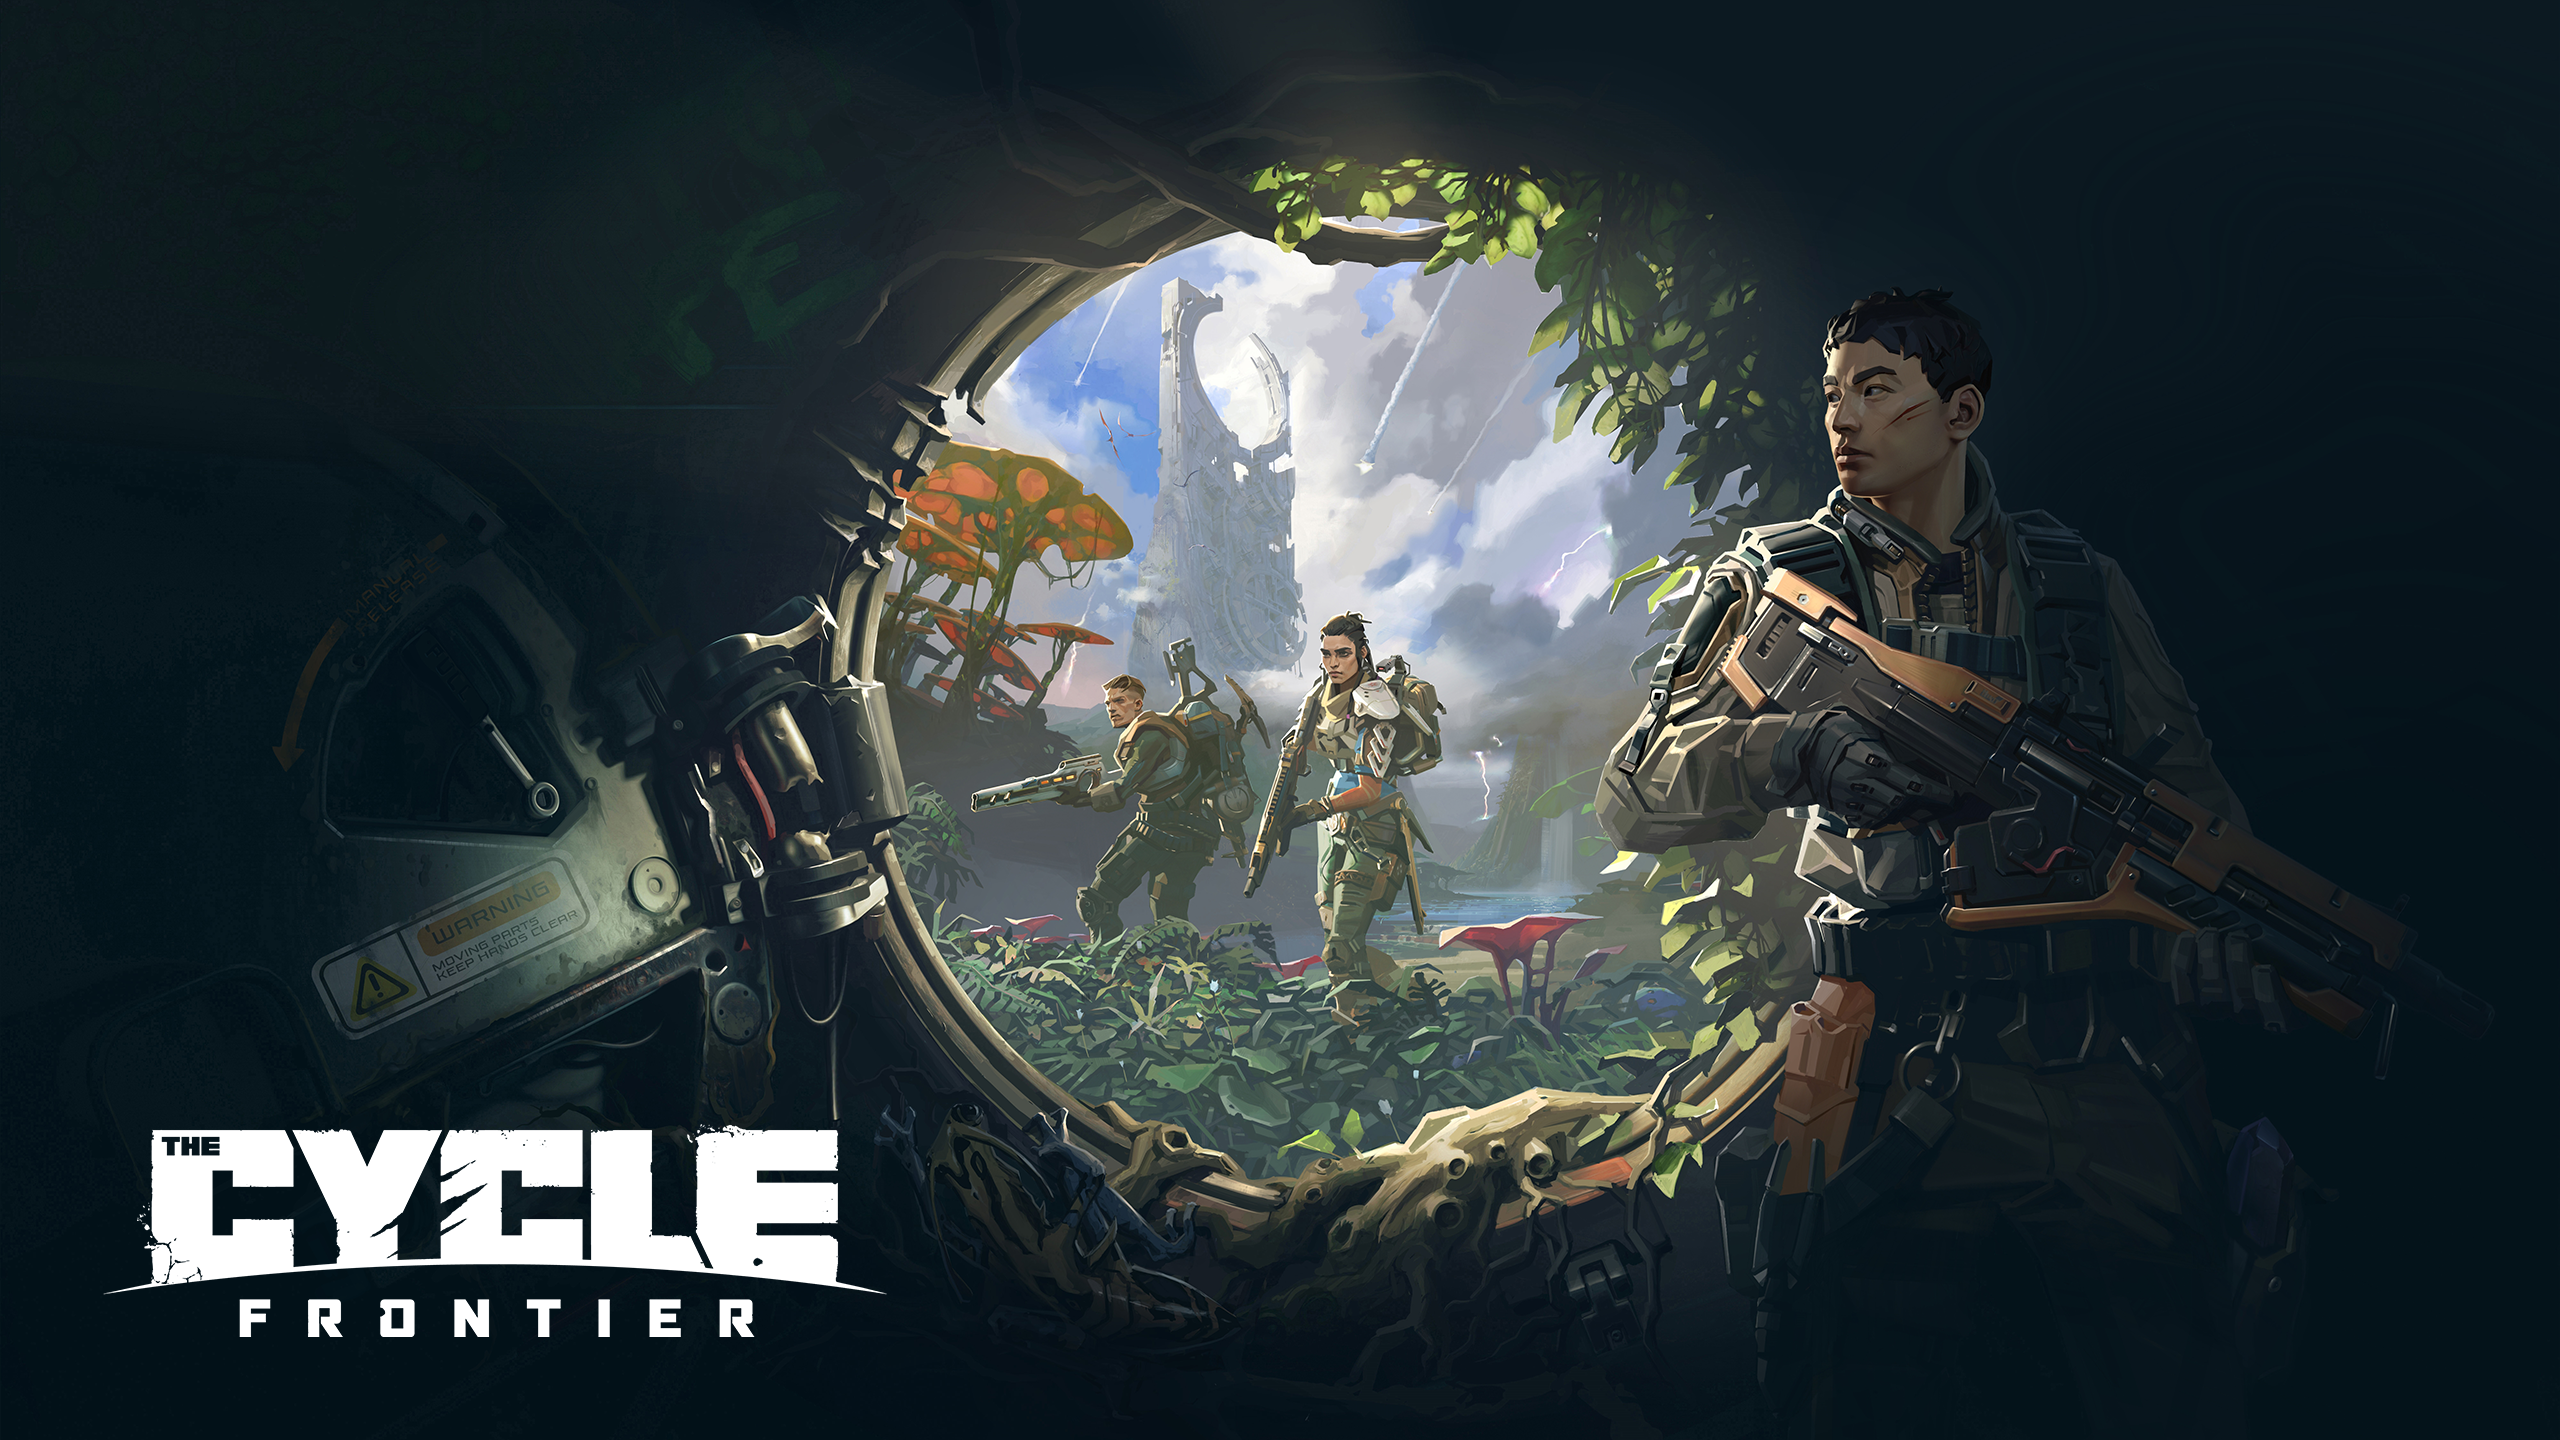 Yager開発pvpveのfps The Cycle Frontier 最終クローズドベータが開催 Gamers Zone